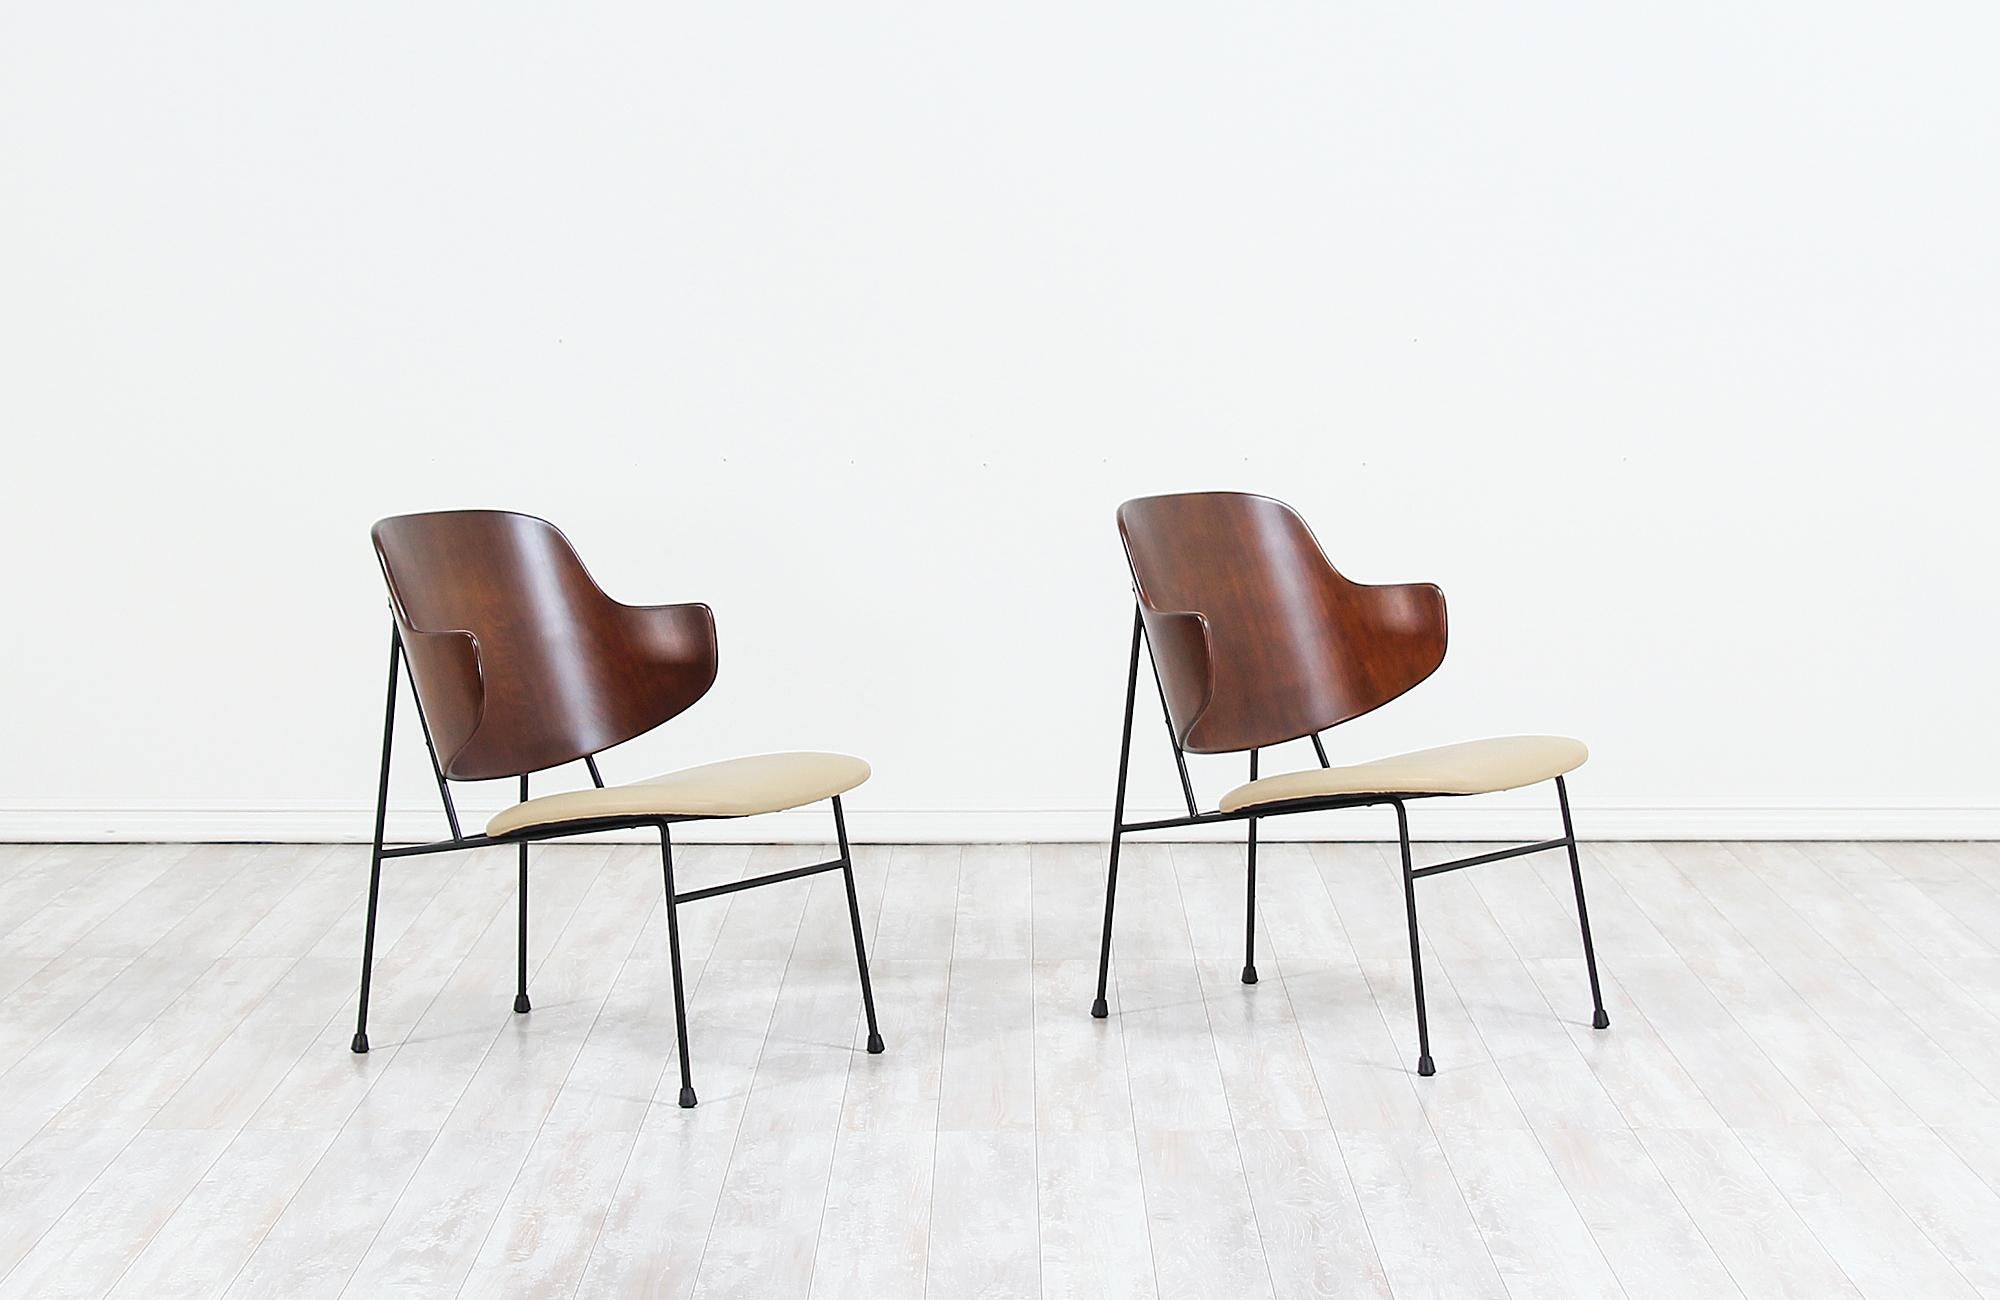 Iconic pair of ‘Penguin’ modern lounge chairs designed by Ib Kofod-Larsen for Selig in Denmark, circa 1960s. These timeless Danish modern chairs feature a structurally sound black iron frame that supports the newly refinished molded bentwood